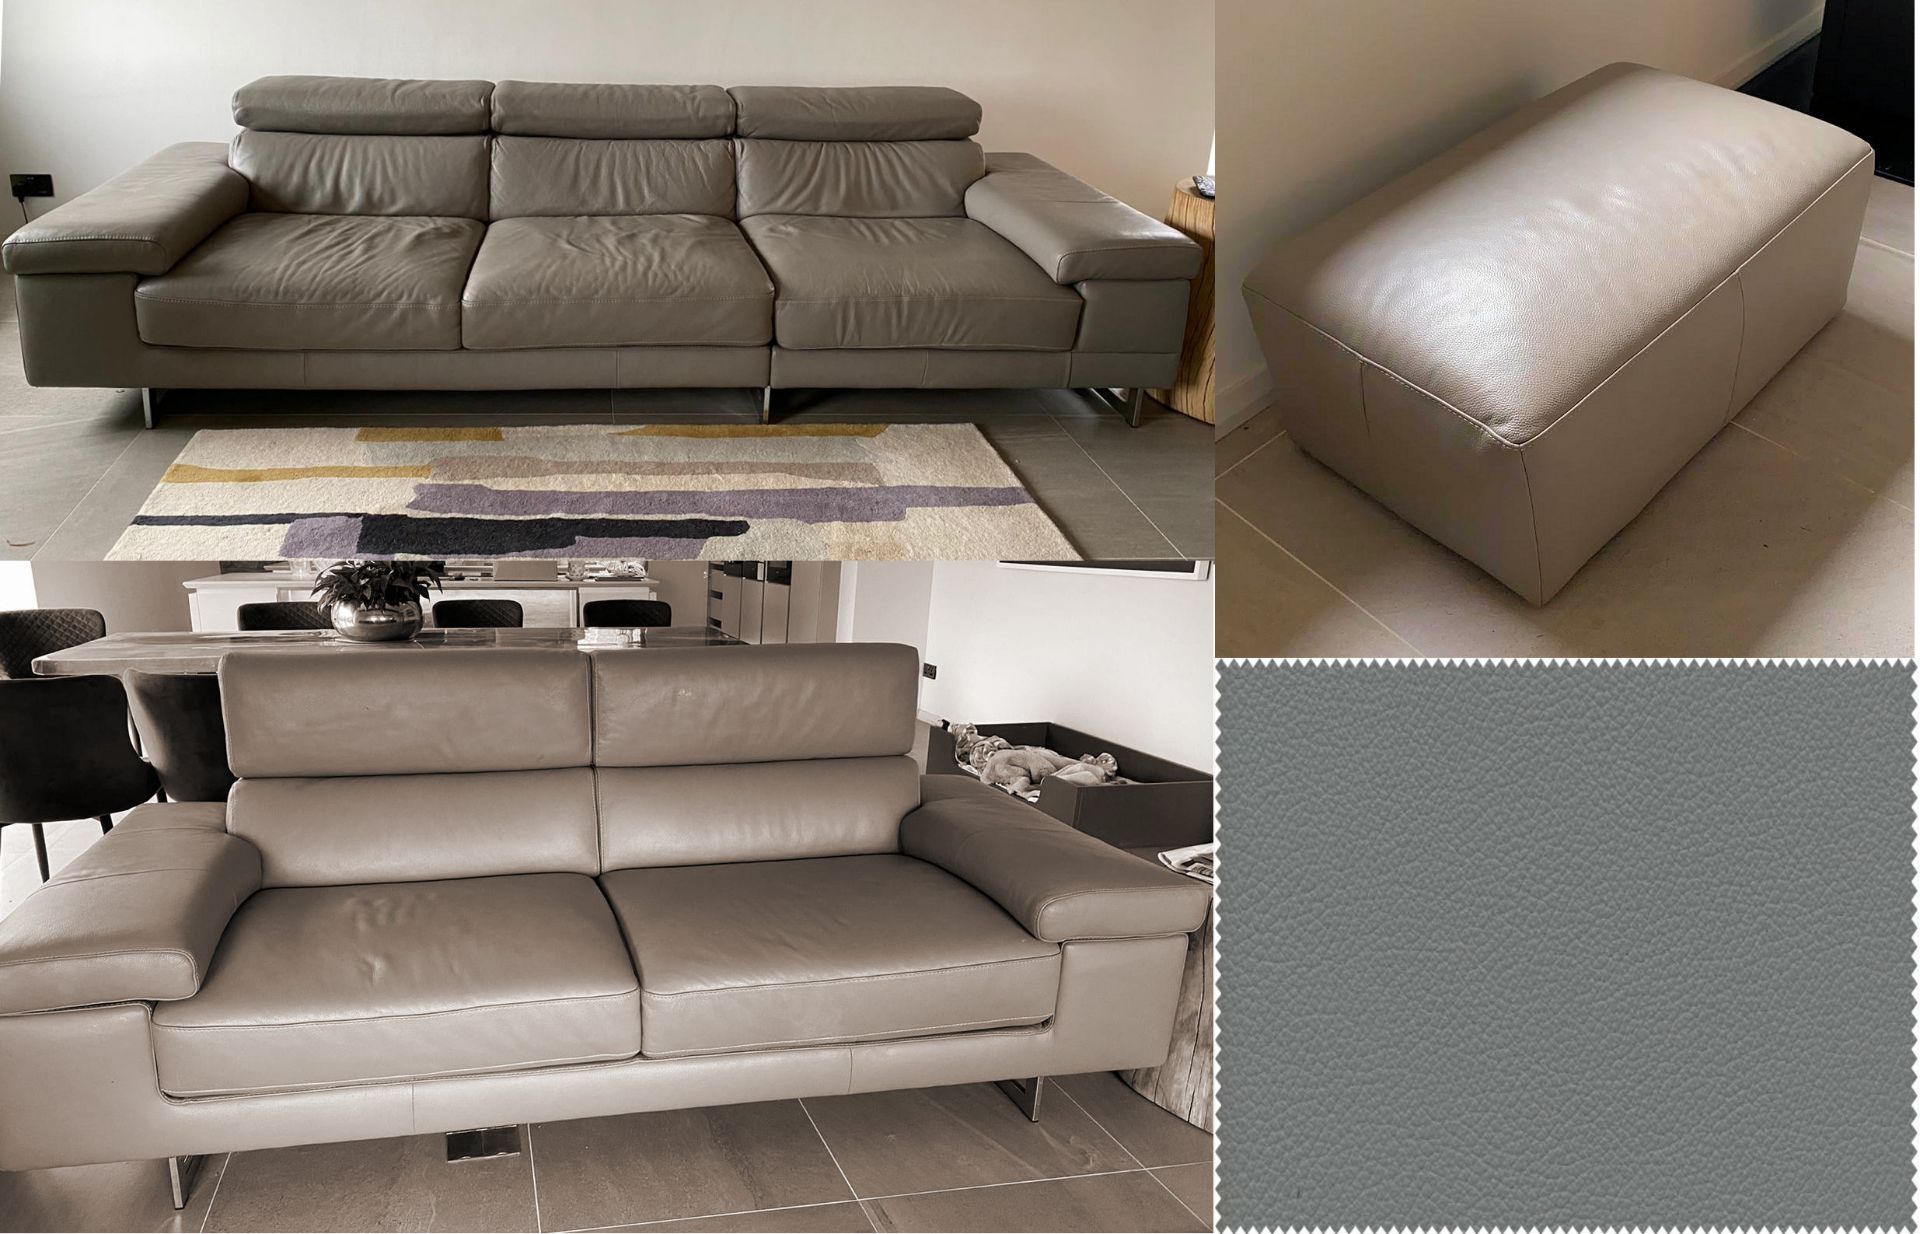 Natuzzi Editions Suite in Denver 10BK with No Contrast Stitching - Includes 3-Seater, 2-Seater and